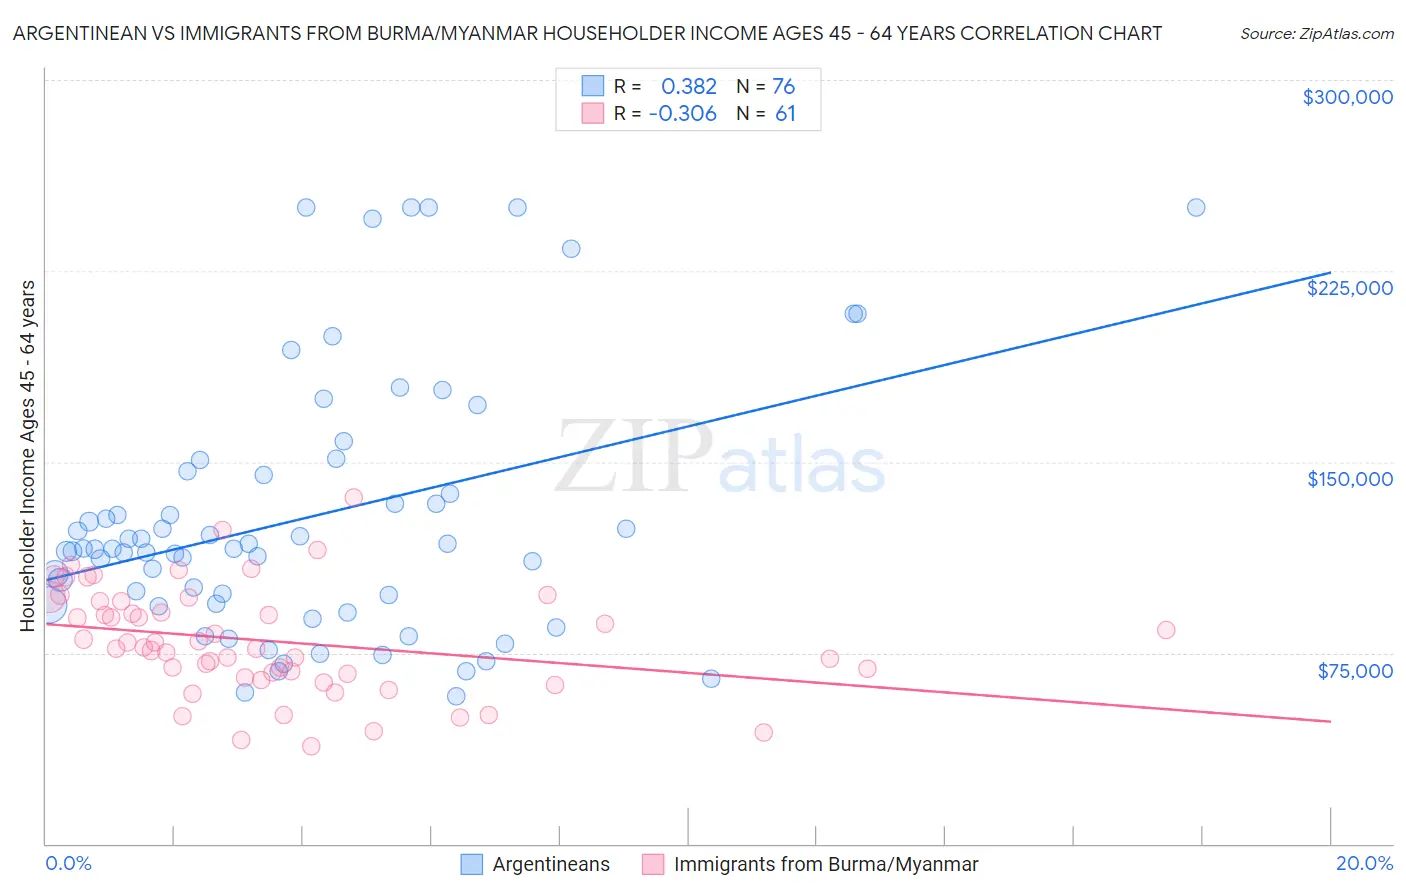 Argentinean vs Immigrants from Burma/Myanmar Householder Income Ages 45 - 64 years